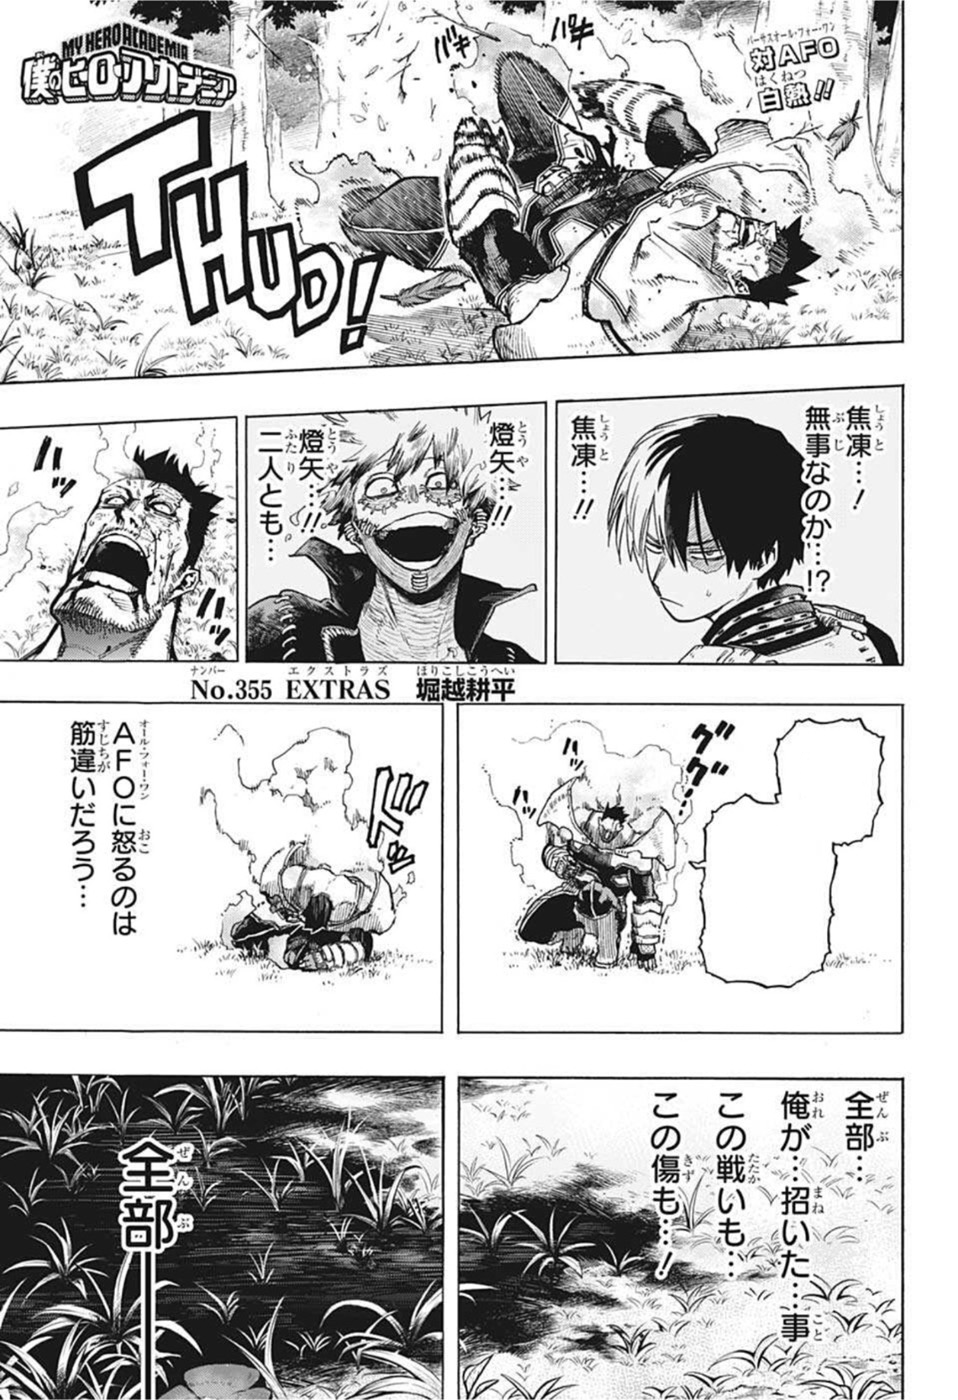 My Hero Academia Chapter 408 Spoilers: Raw Scans & Release date